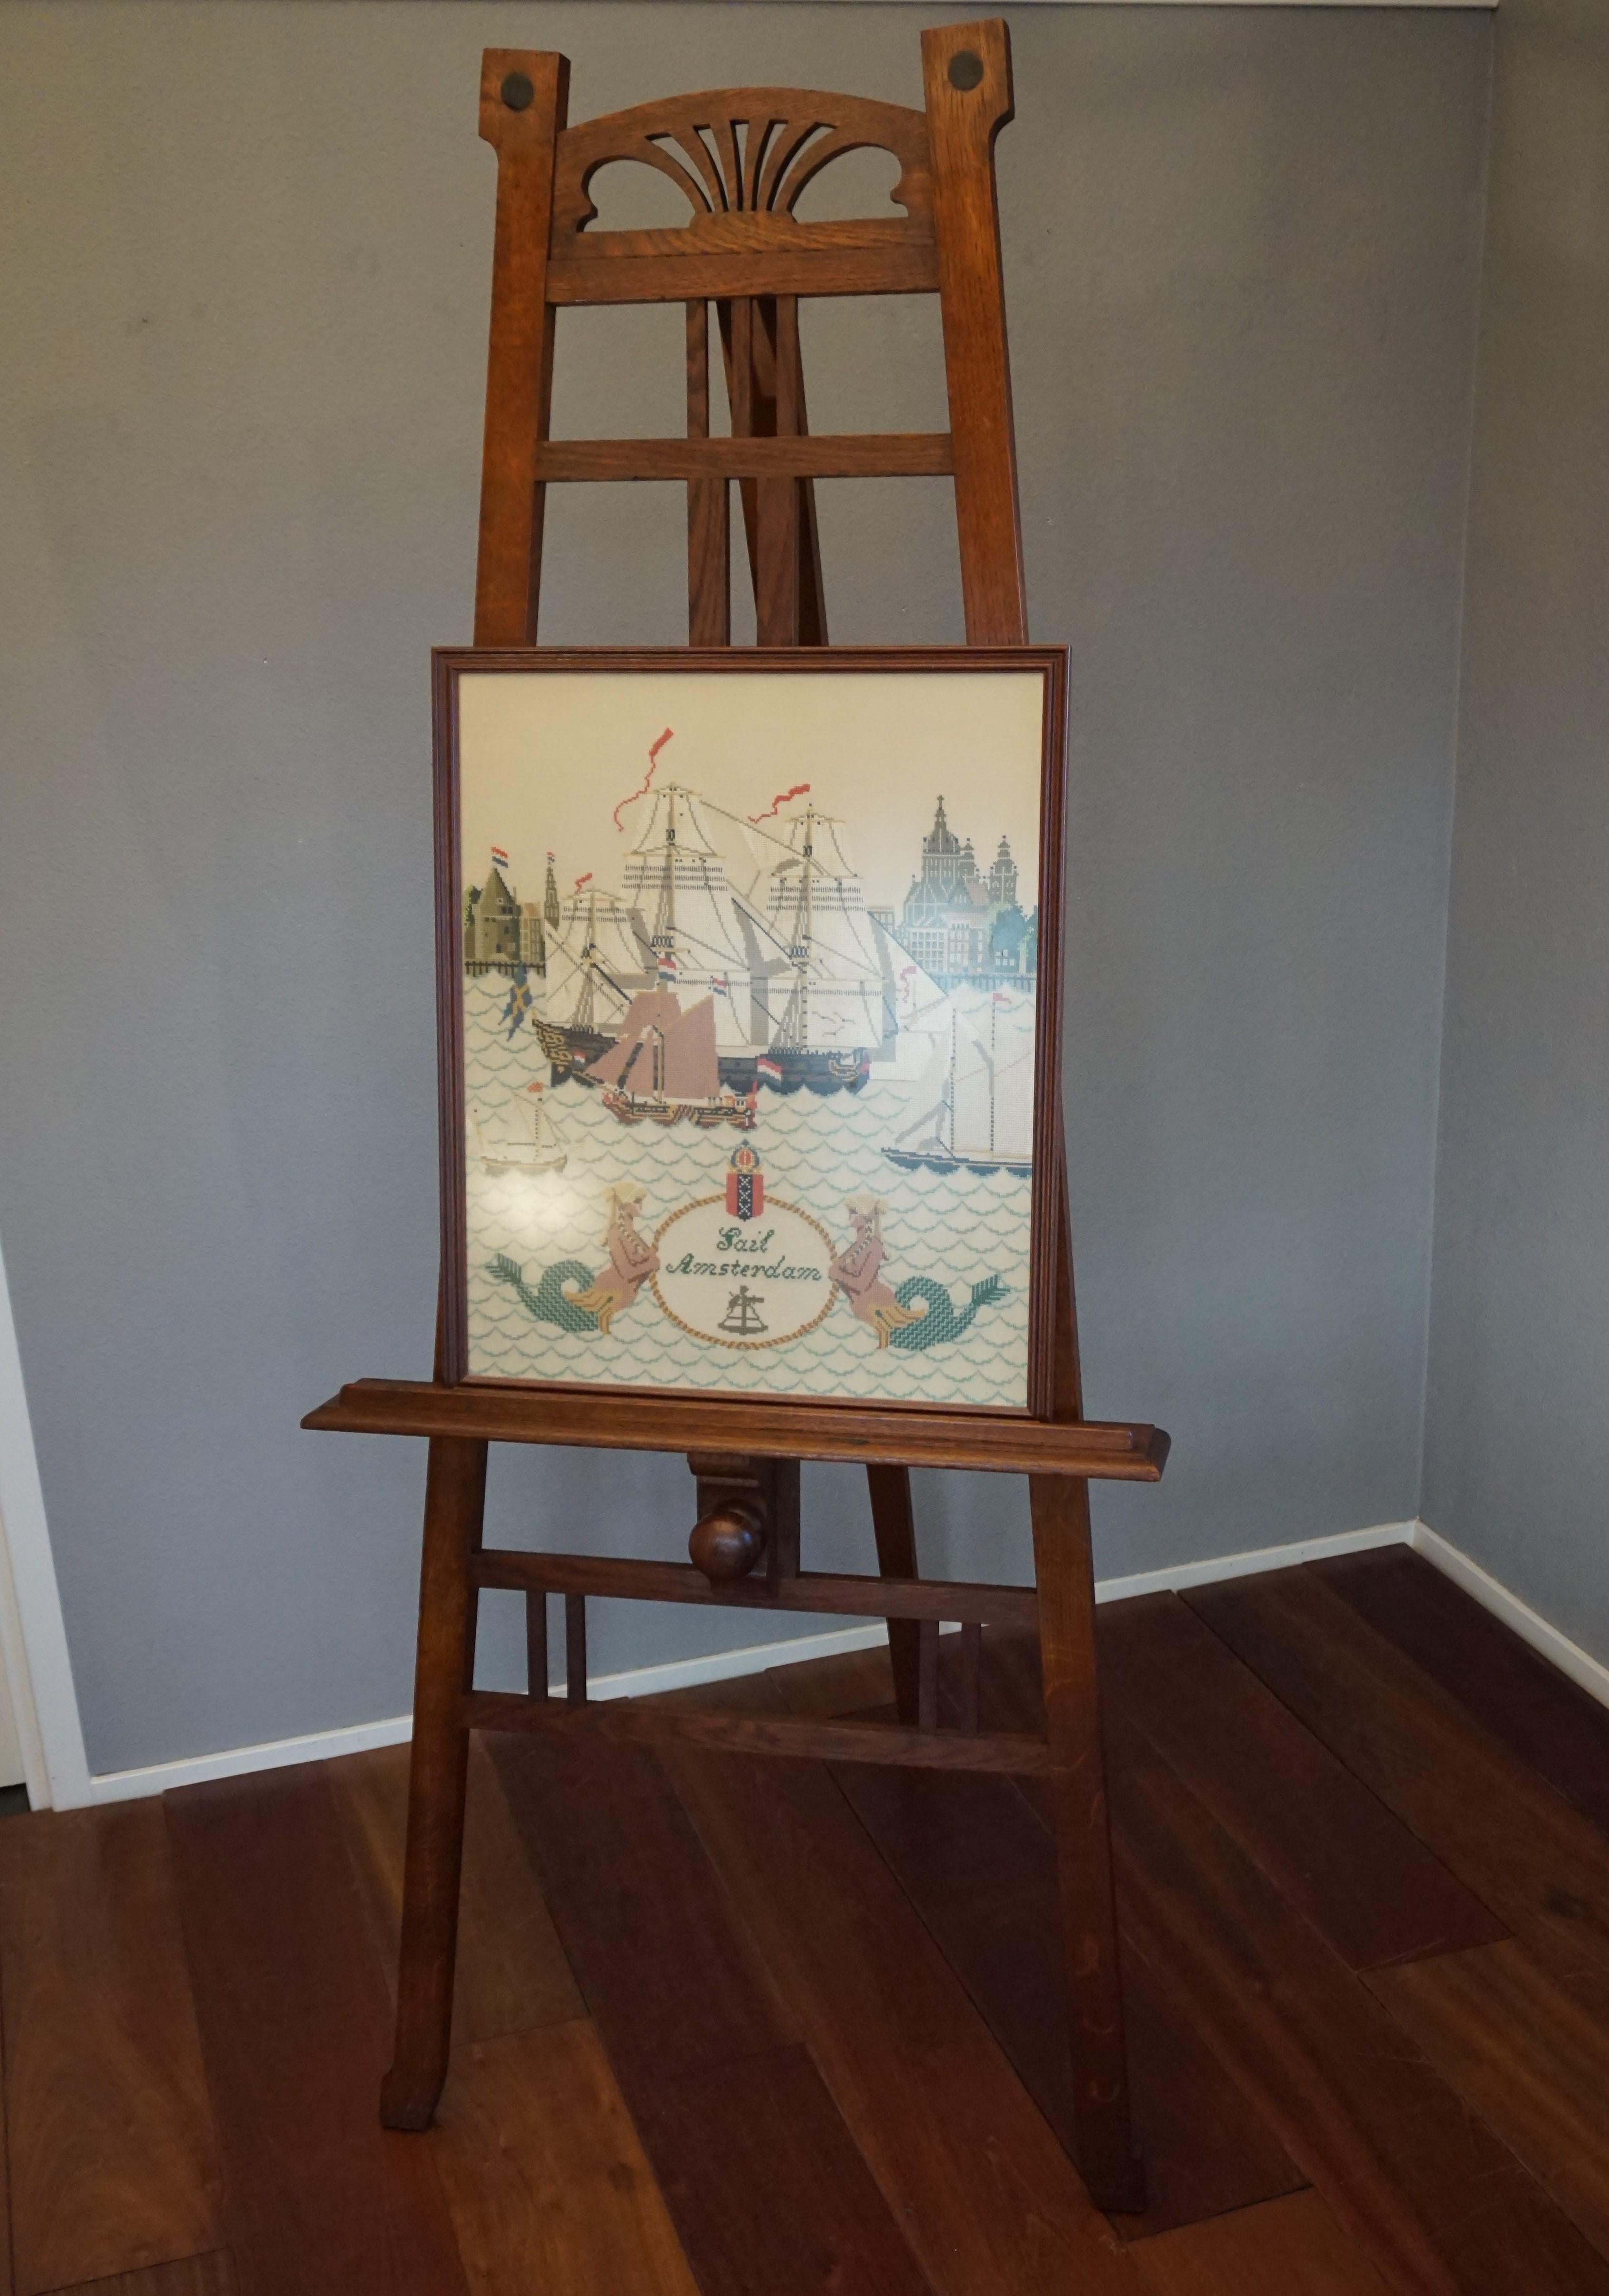 Unique Early 1900s Arts and Crafts Gallery Display / Artist's Studio Floor Easel 7